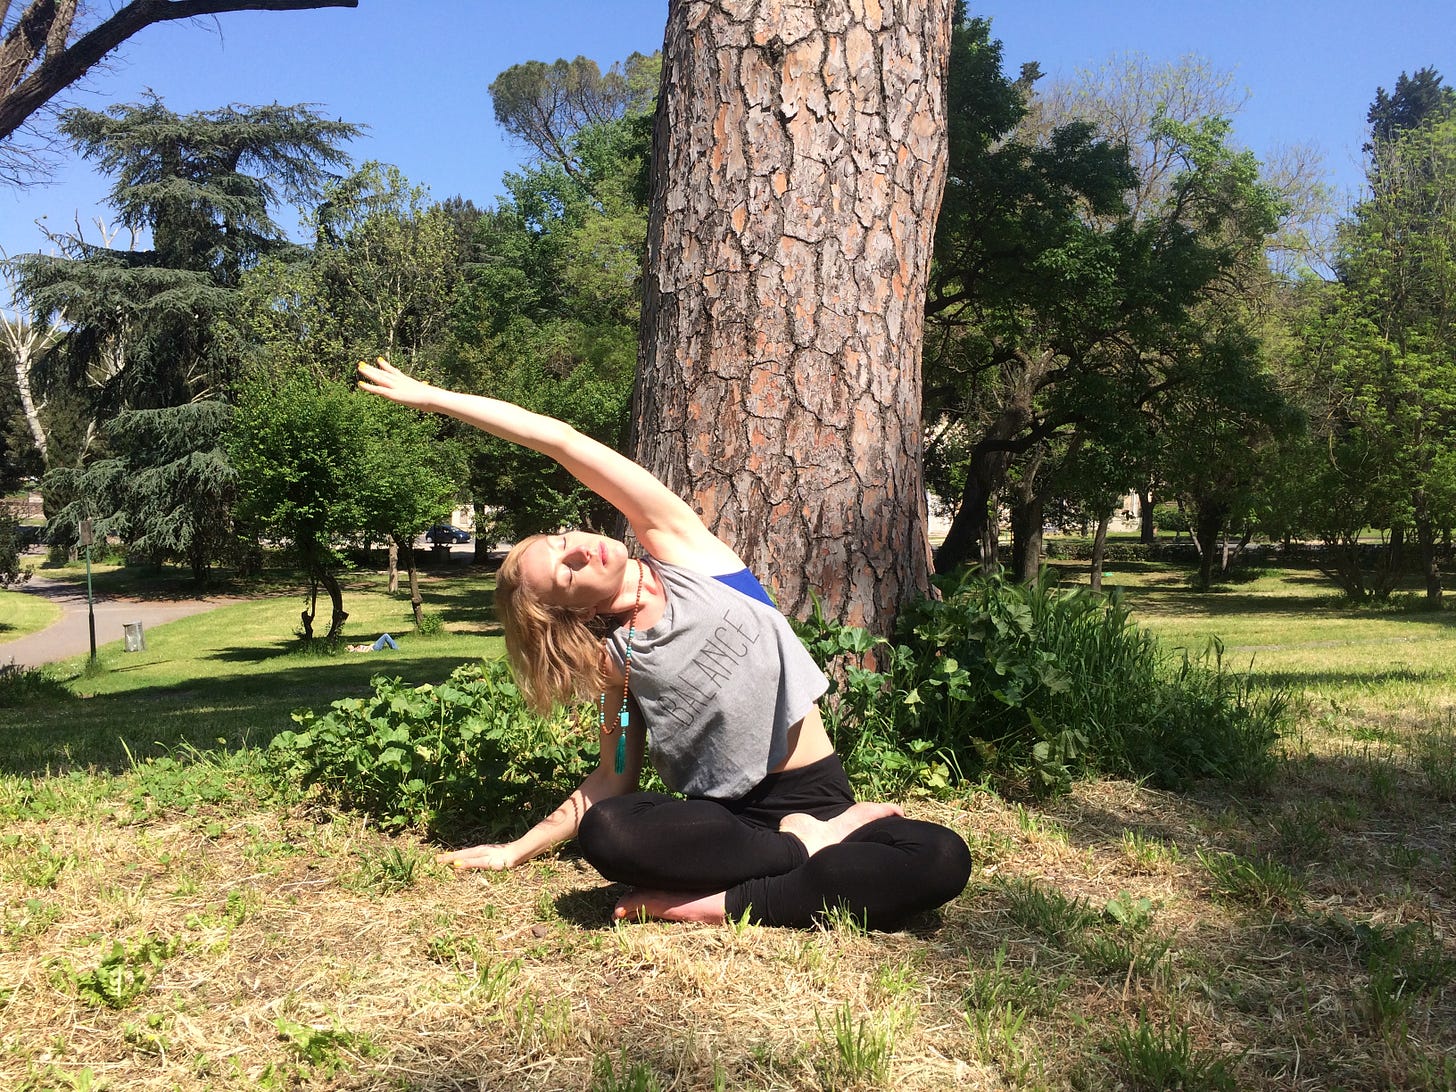 Jade doing a seated side stretch in a park